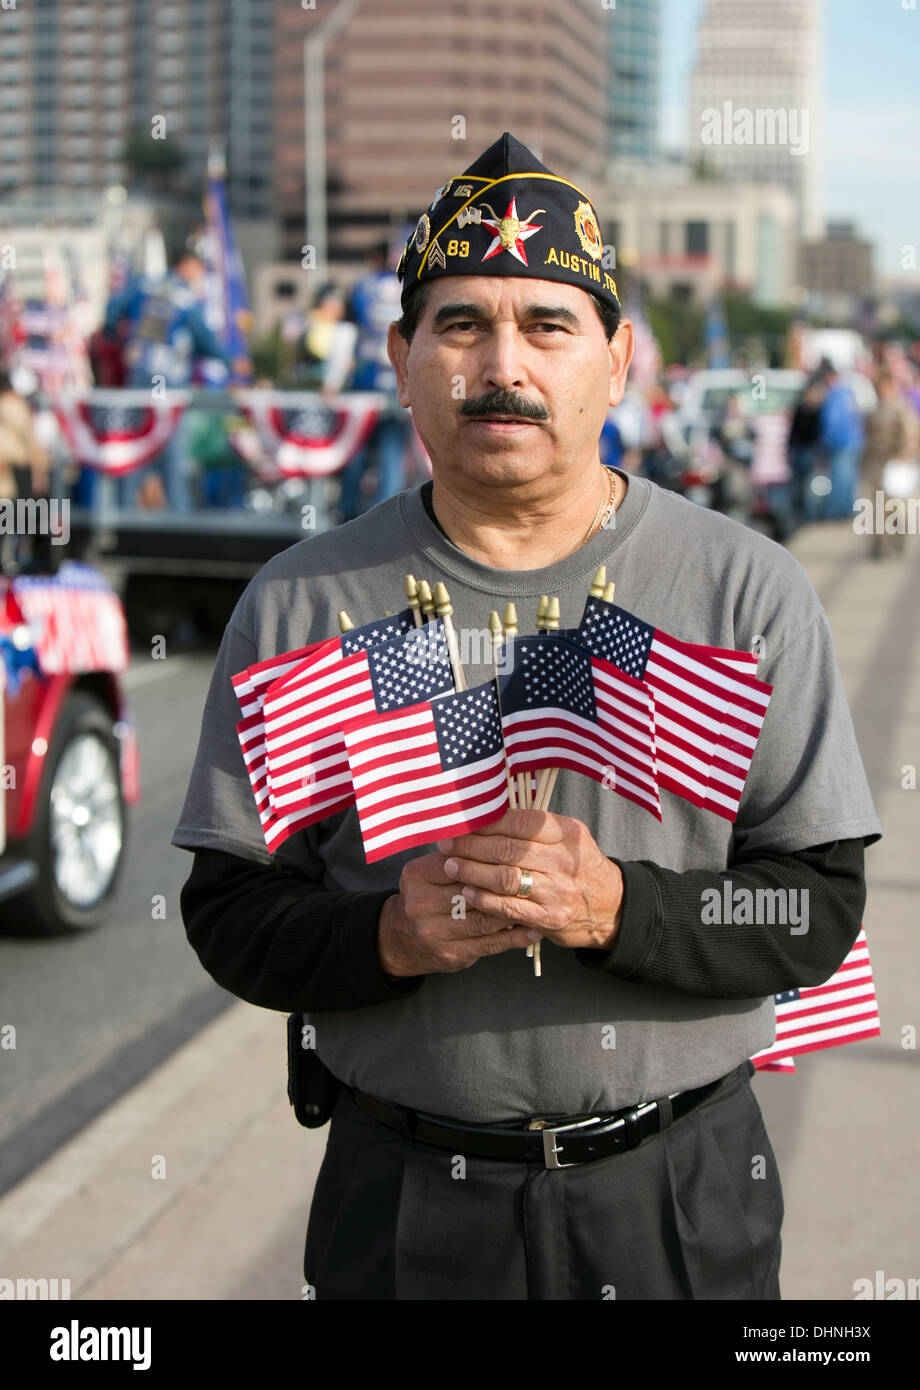 Male Hispanic military veteran holds several small American flags during a Veteran's Day parade in Austin, Texas Stock Photo